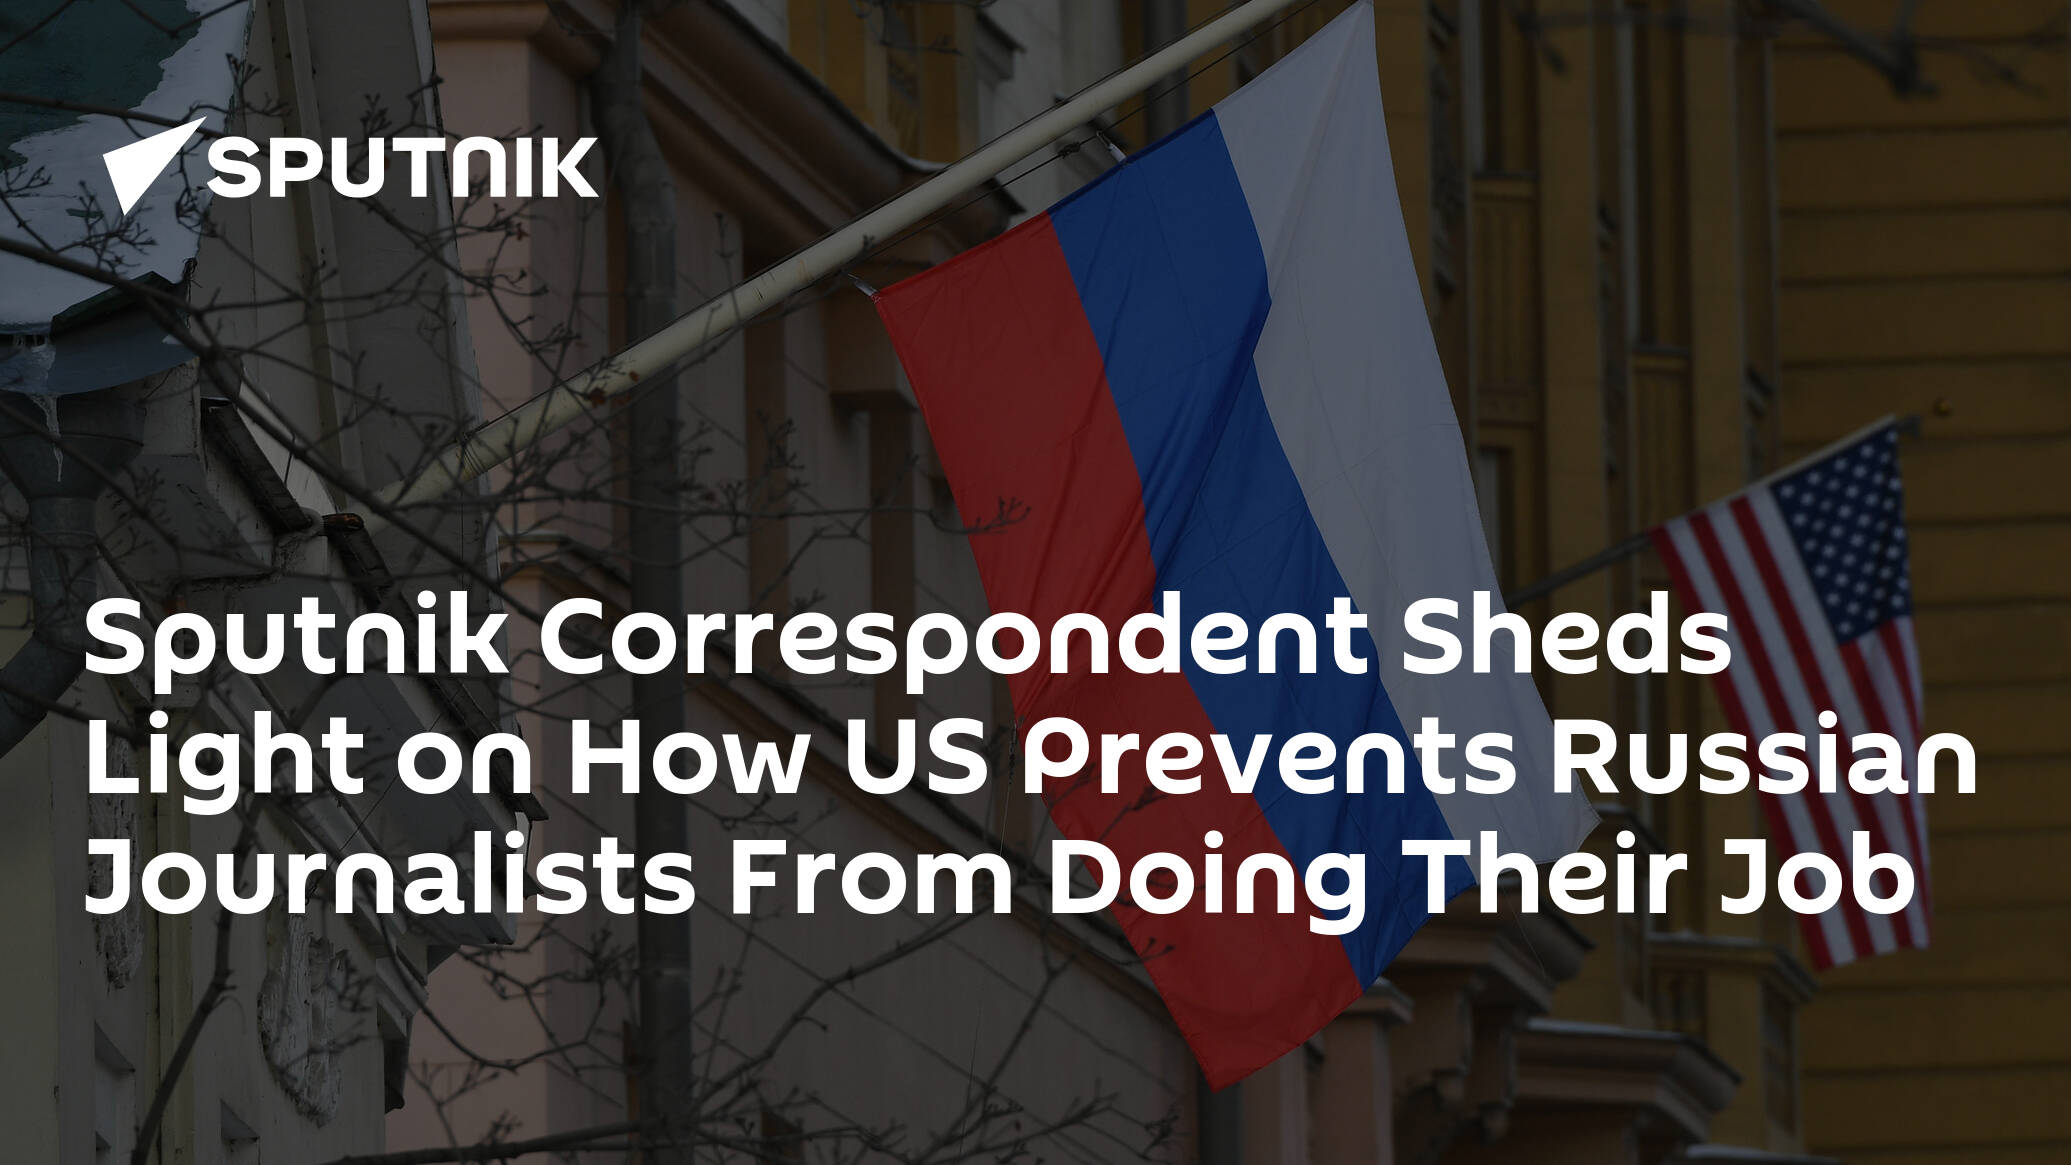 Sputnik Correspondent Sheds Light on How US Prevents Russian Journalists From Doing Their Job